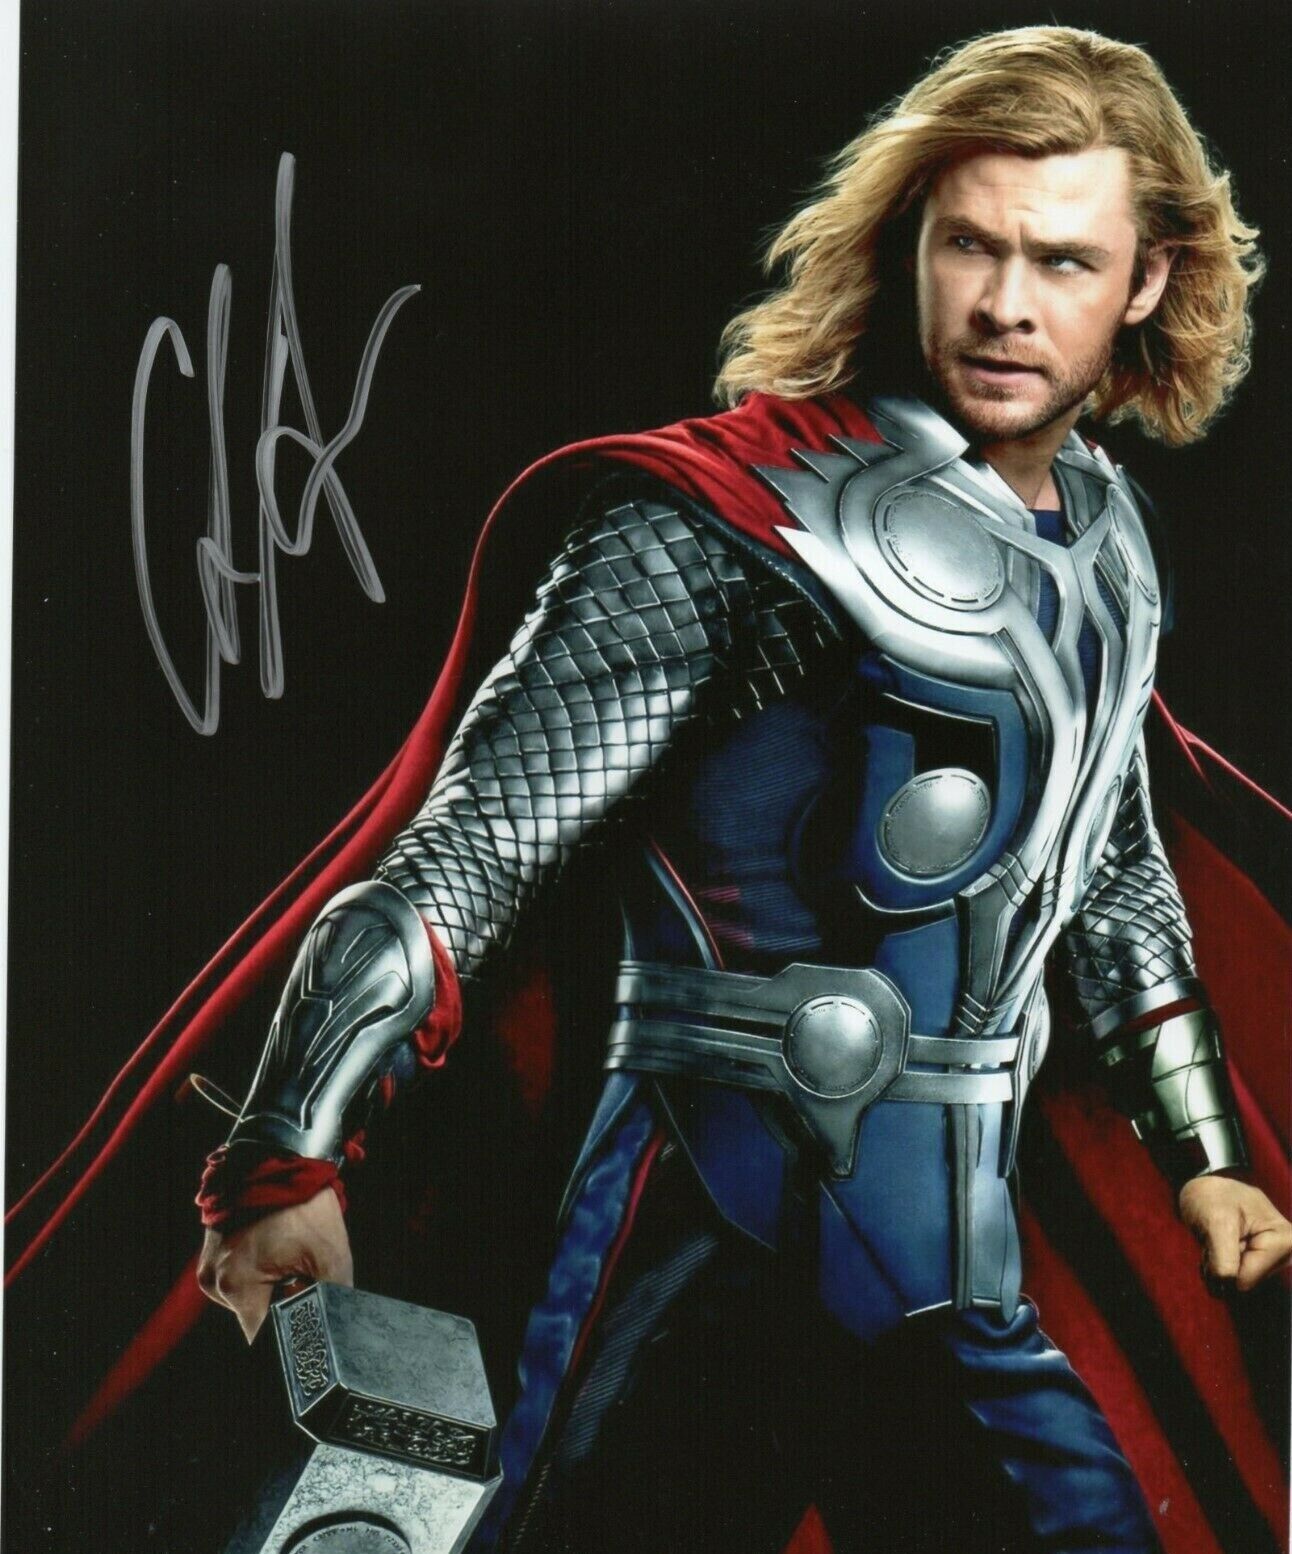 Chris Hemsworth Autographed Signed 8x10 Photo Poster painting ( Thor ) REPRINT